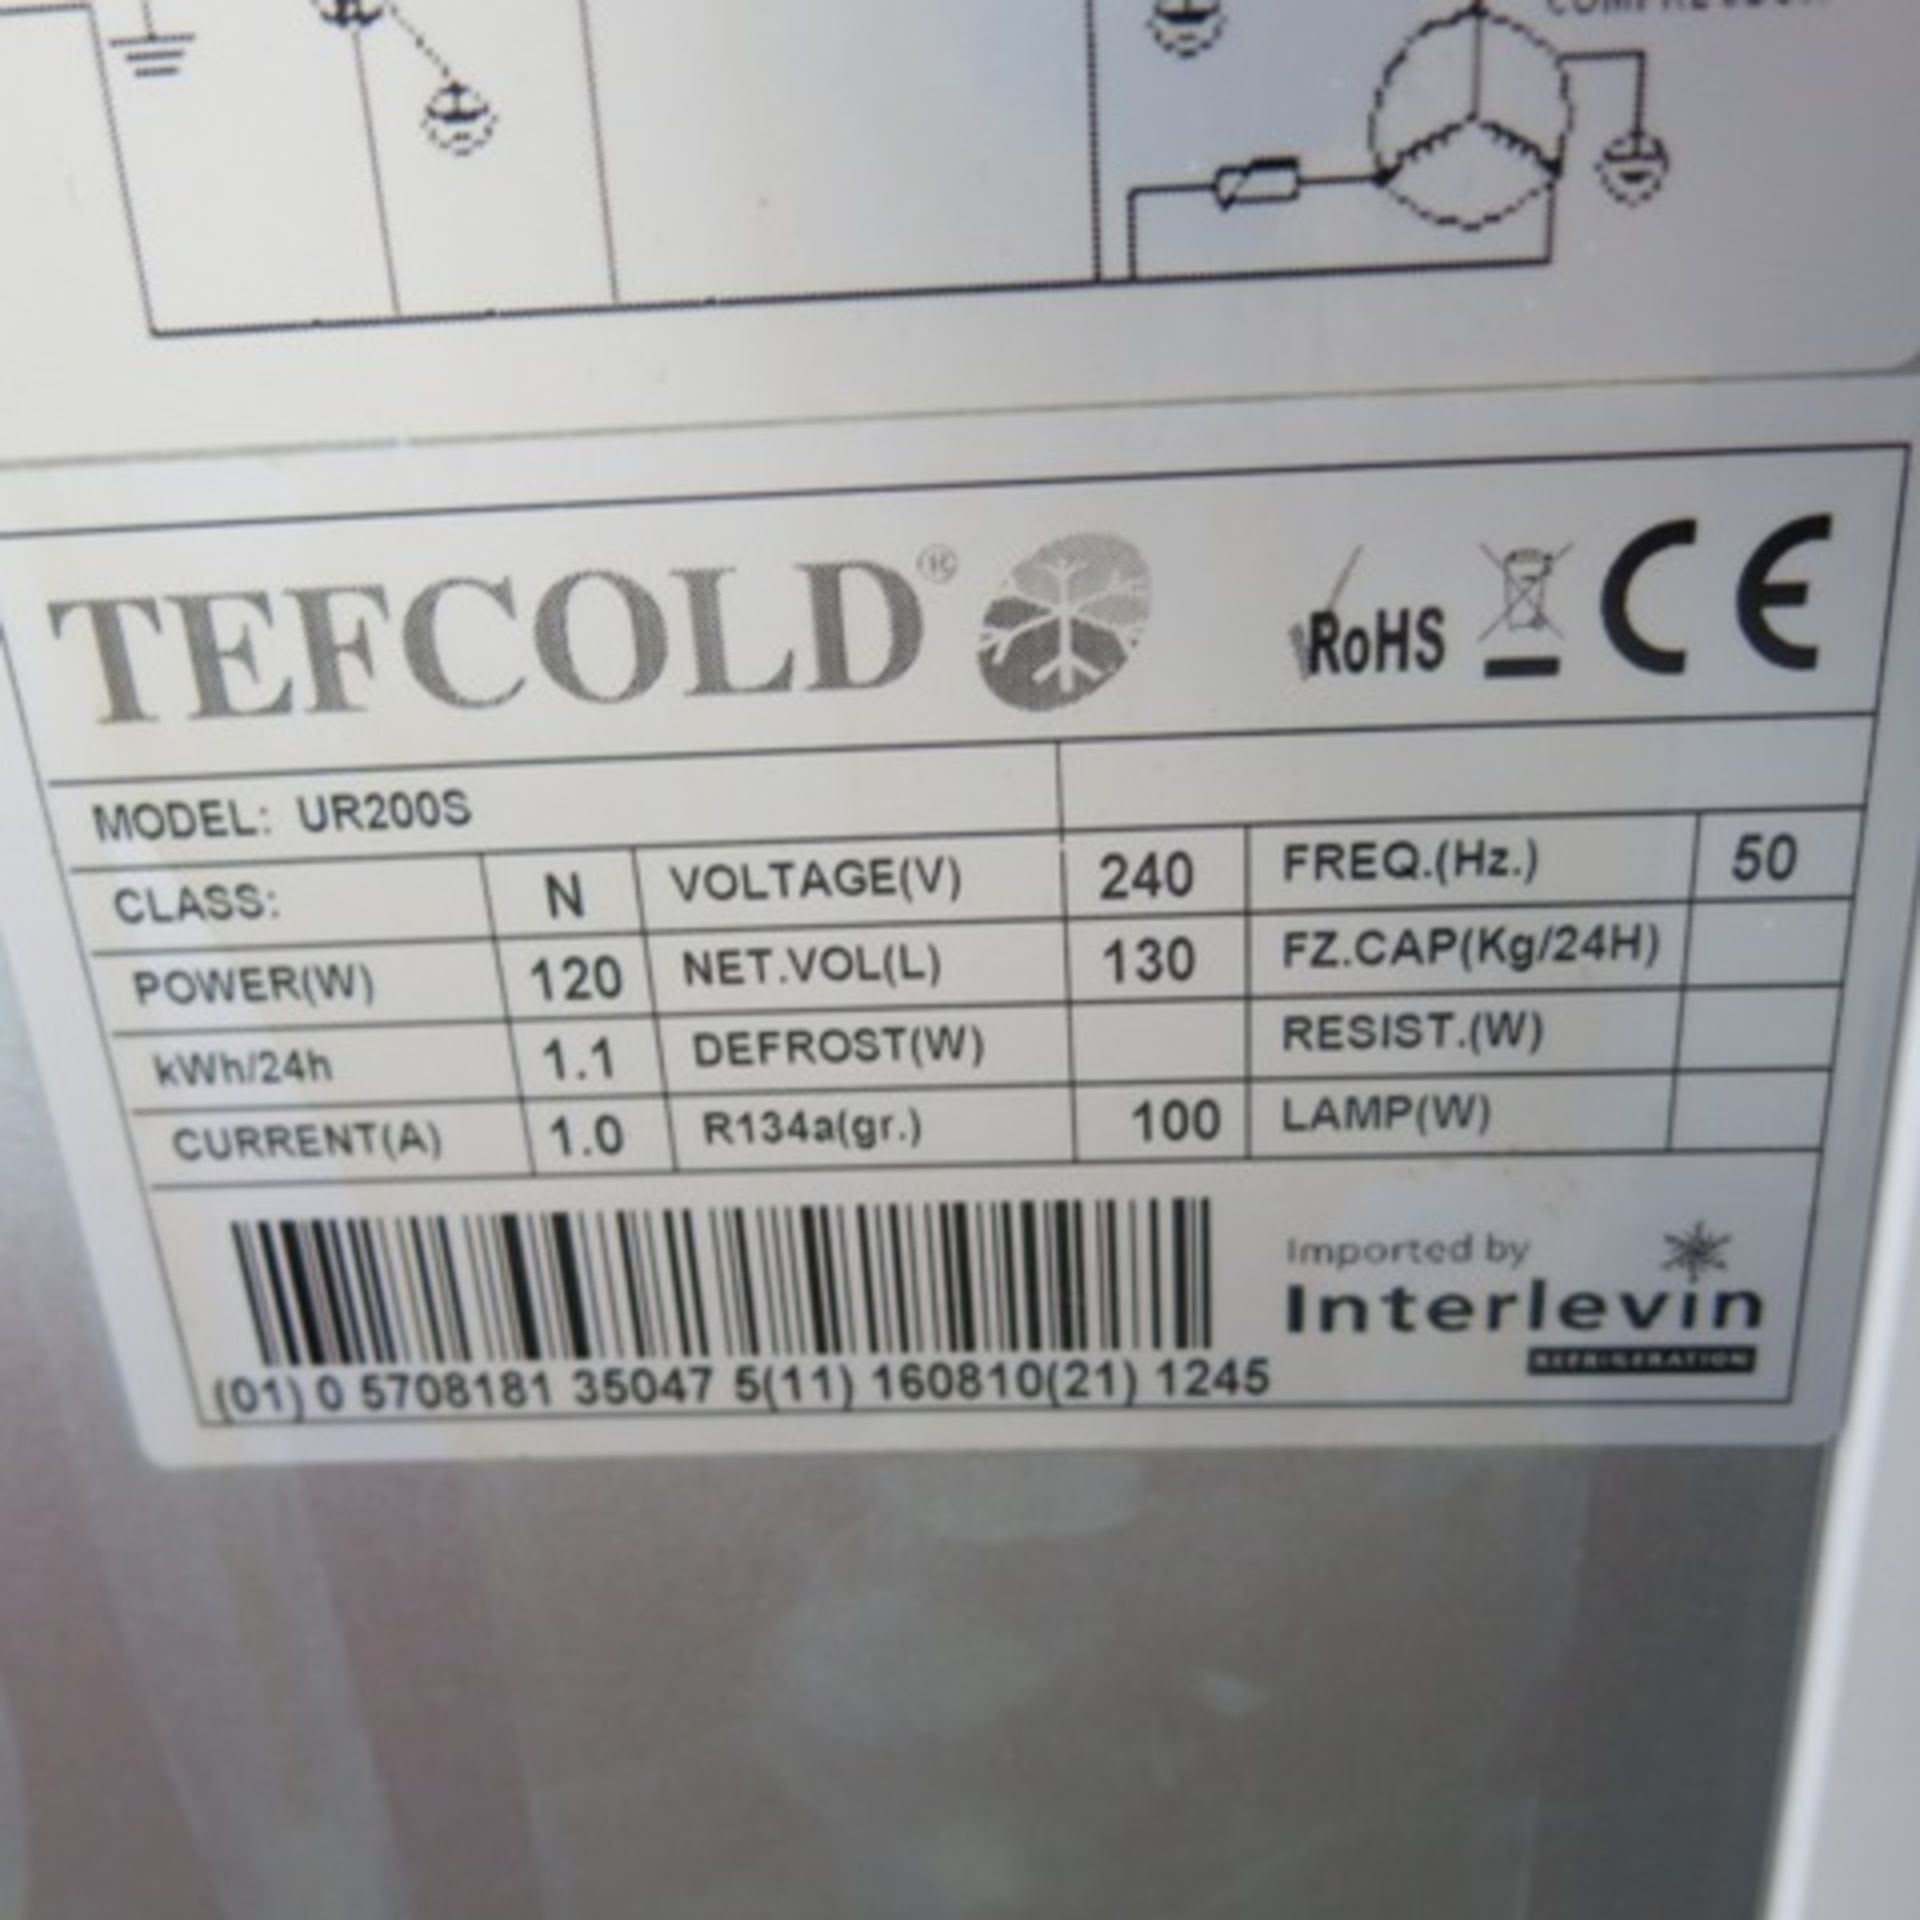 Tefcold Under Counter Chiller, Model UR200S, Year 2016, Size (H)80 x (D)58 x (W)60cm. Comes with Key - Image 5 of 6